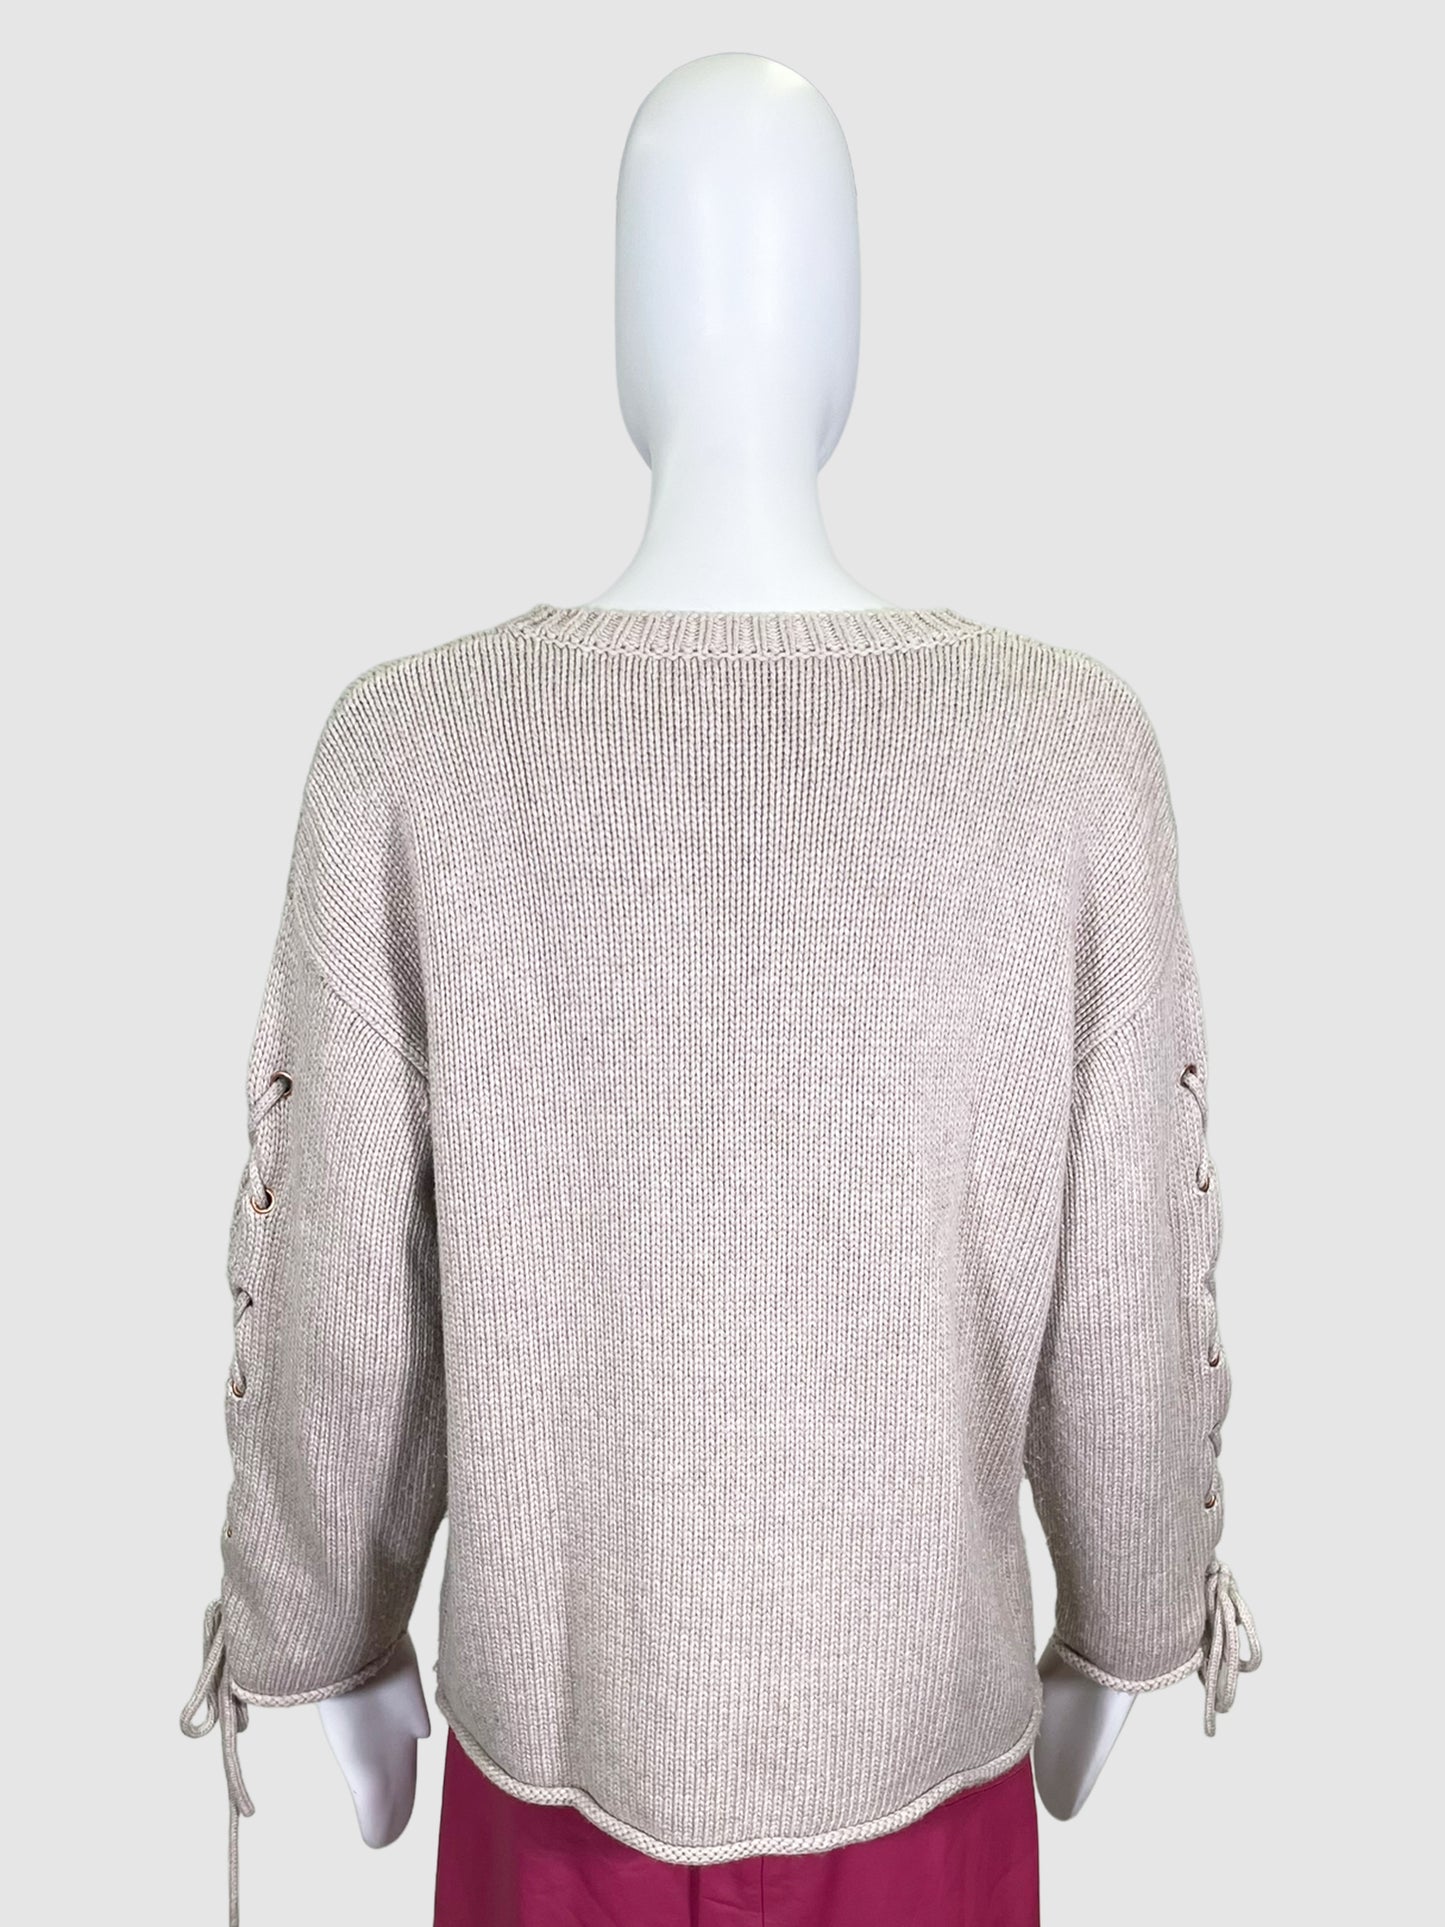 See by Chloé Laced-Up Sleeve Sweater - Size S